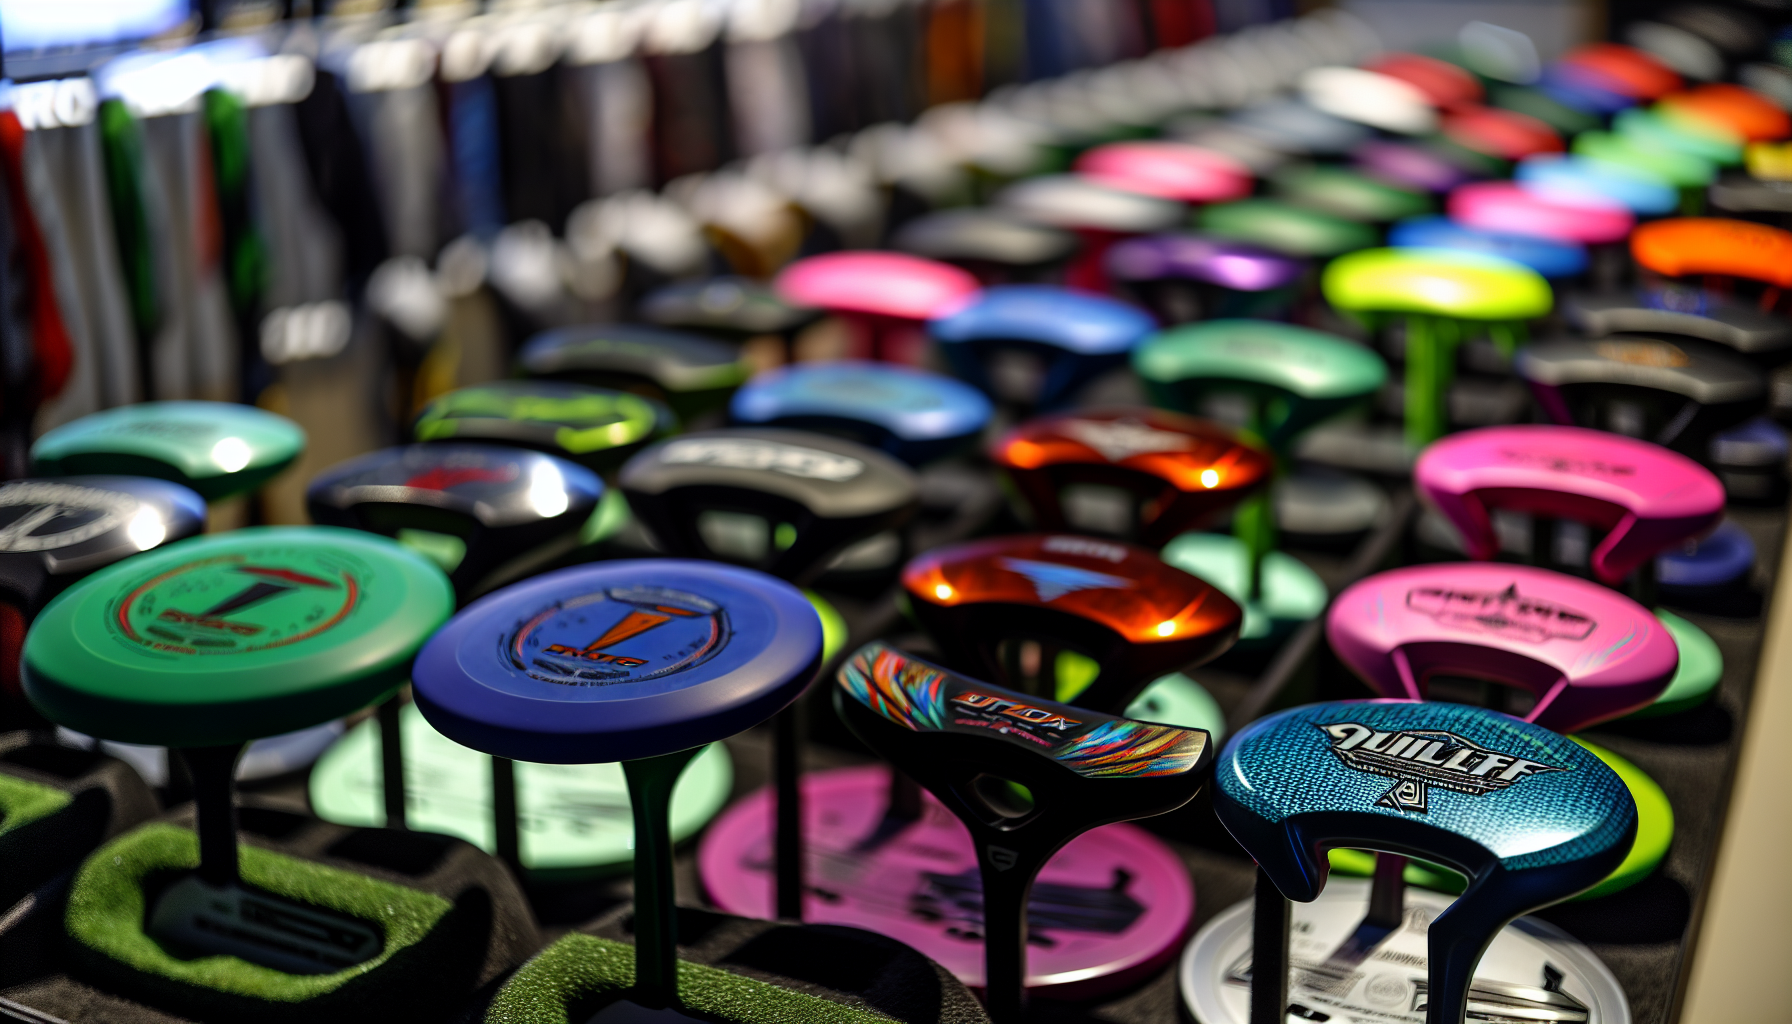 Various disc golf putters lined up on a display